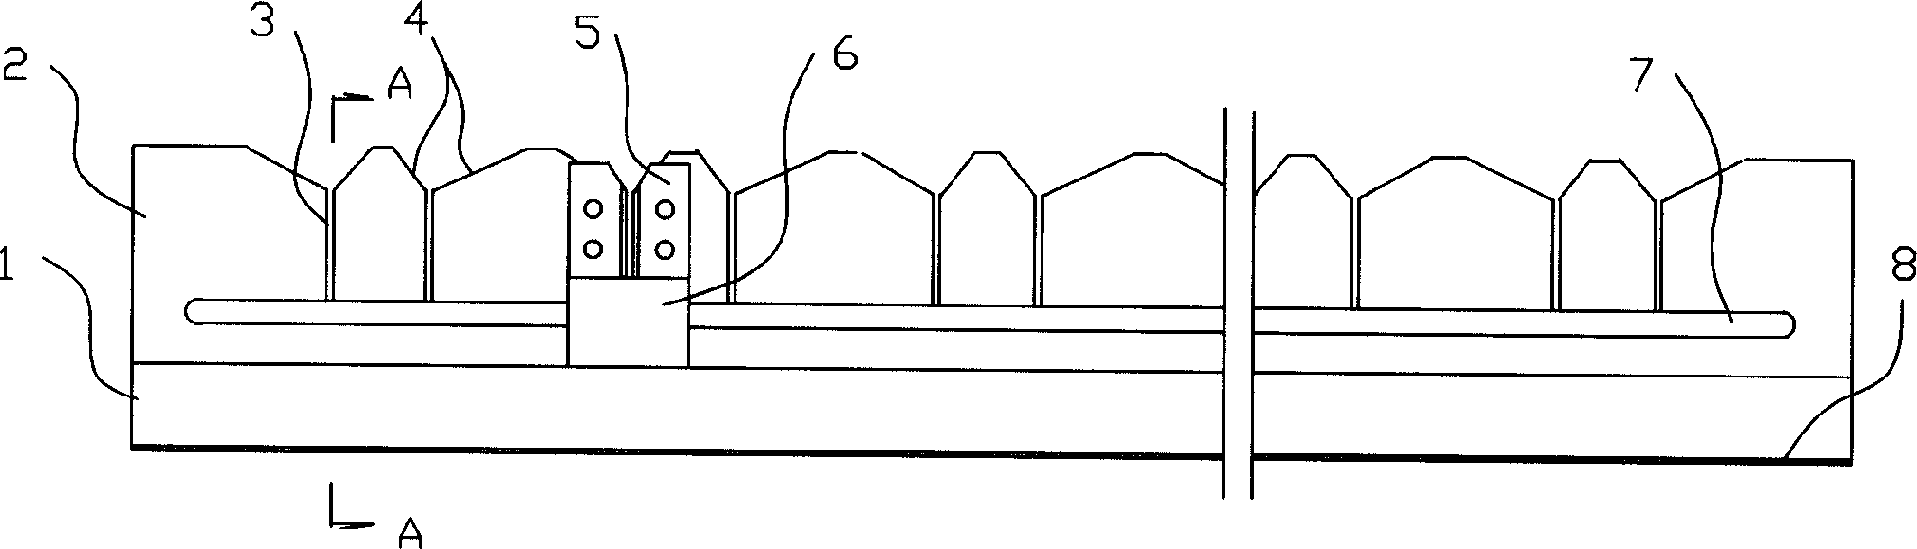 Suture fixer for interrupted suture operation